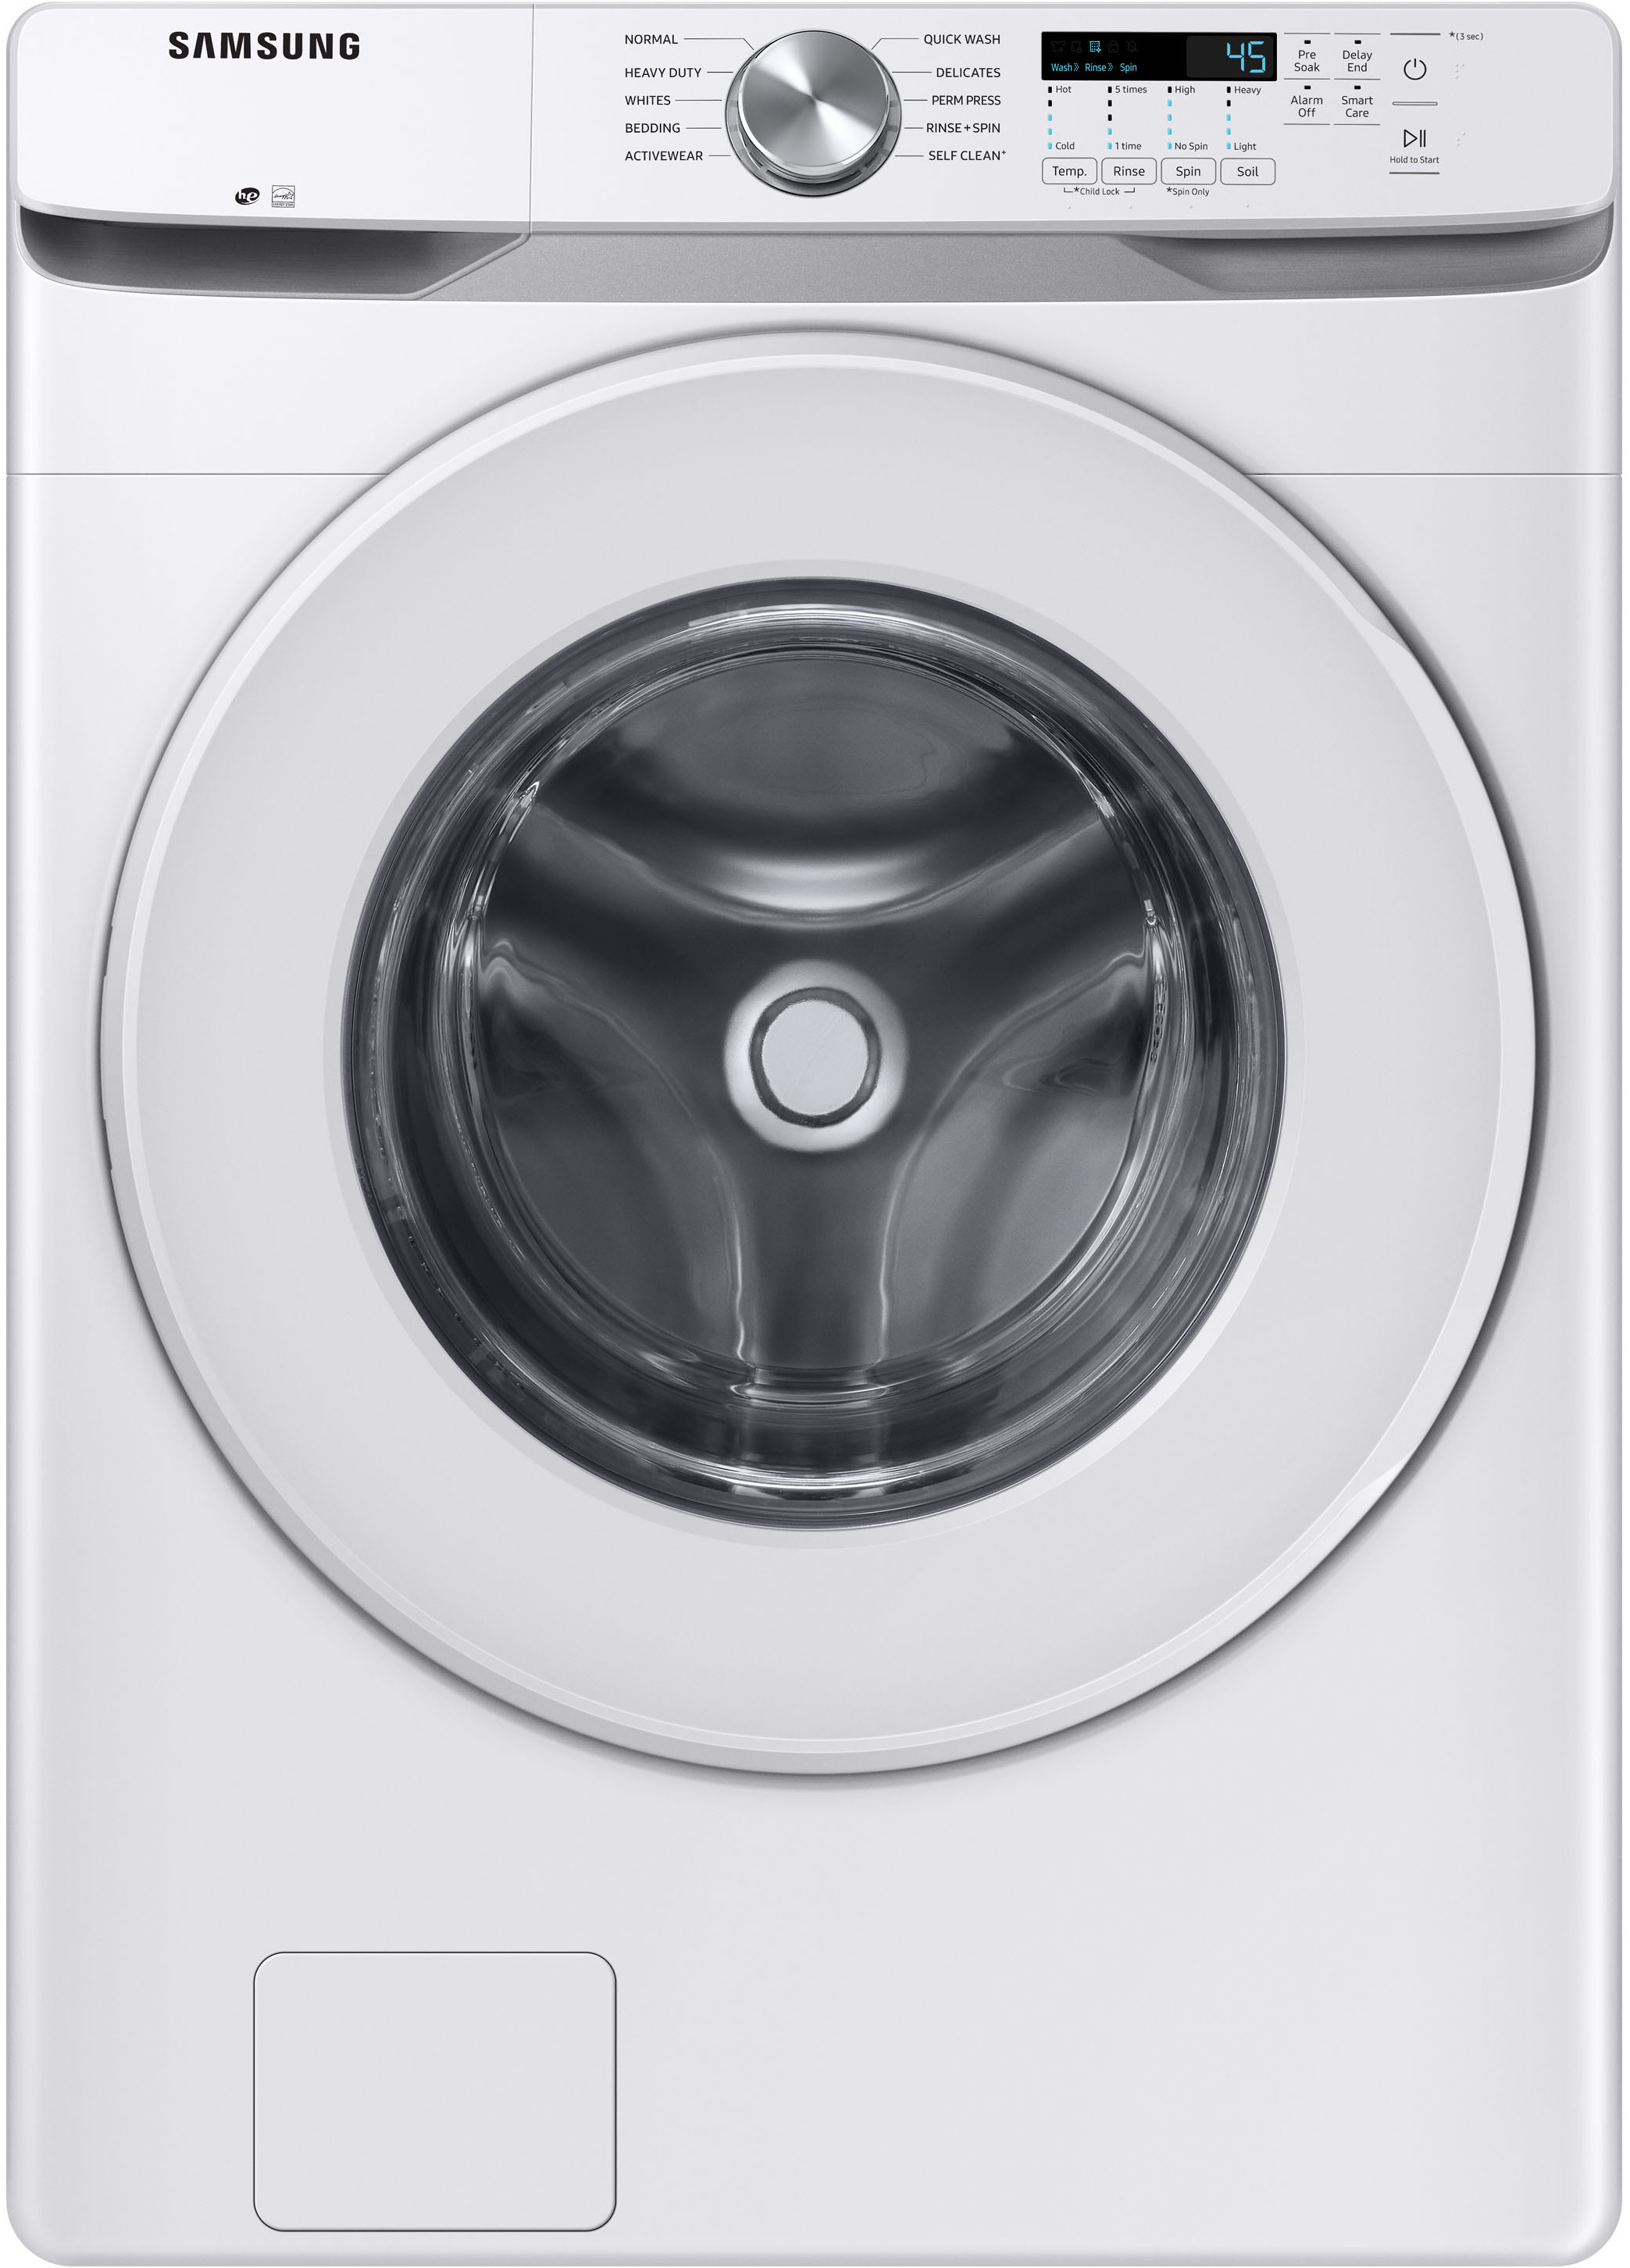 Samsung 4.5 Cu. Ft. Front Load Washer WF45T6000AW